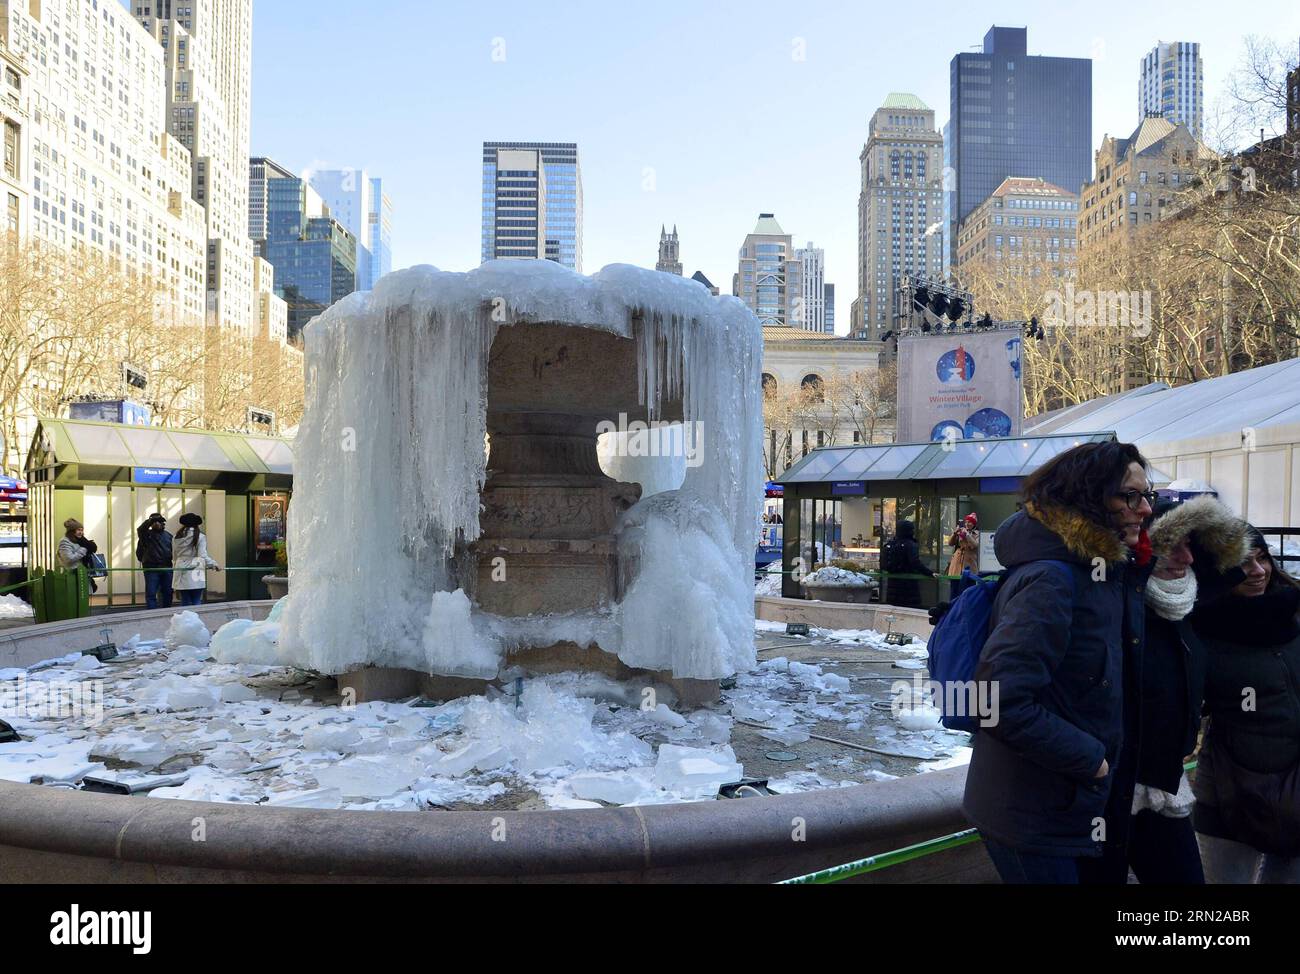 People take photos of the frozen fountain at Bryan Park, in New York City, the United States, on Feb. 20, 2015. New York City Emergency Management has issued a weather alert for dangerous cold temperatures for Feb. 20, followed by a wintry mix of snow, sleet and freezing rain. A bitterly cold chill known as the Siberian Express has enveloped much of eastern America, sending temperatures plummeting below their normal February levels to record lows in at least 100 places. ) US-NEW YORK-WEATHER-COLD WAVE WangxLei PUBLICATIONxNOTxINxCHN   Celebrities Take Photos of The Frozen Fountain AT Bryan Par Stock Photo